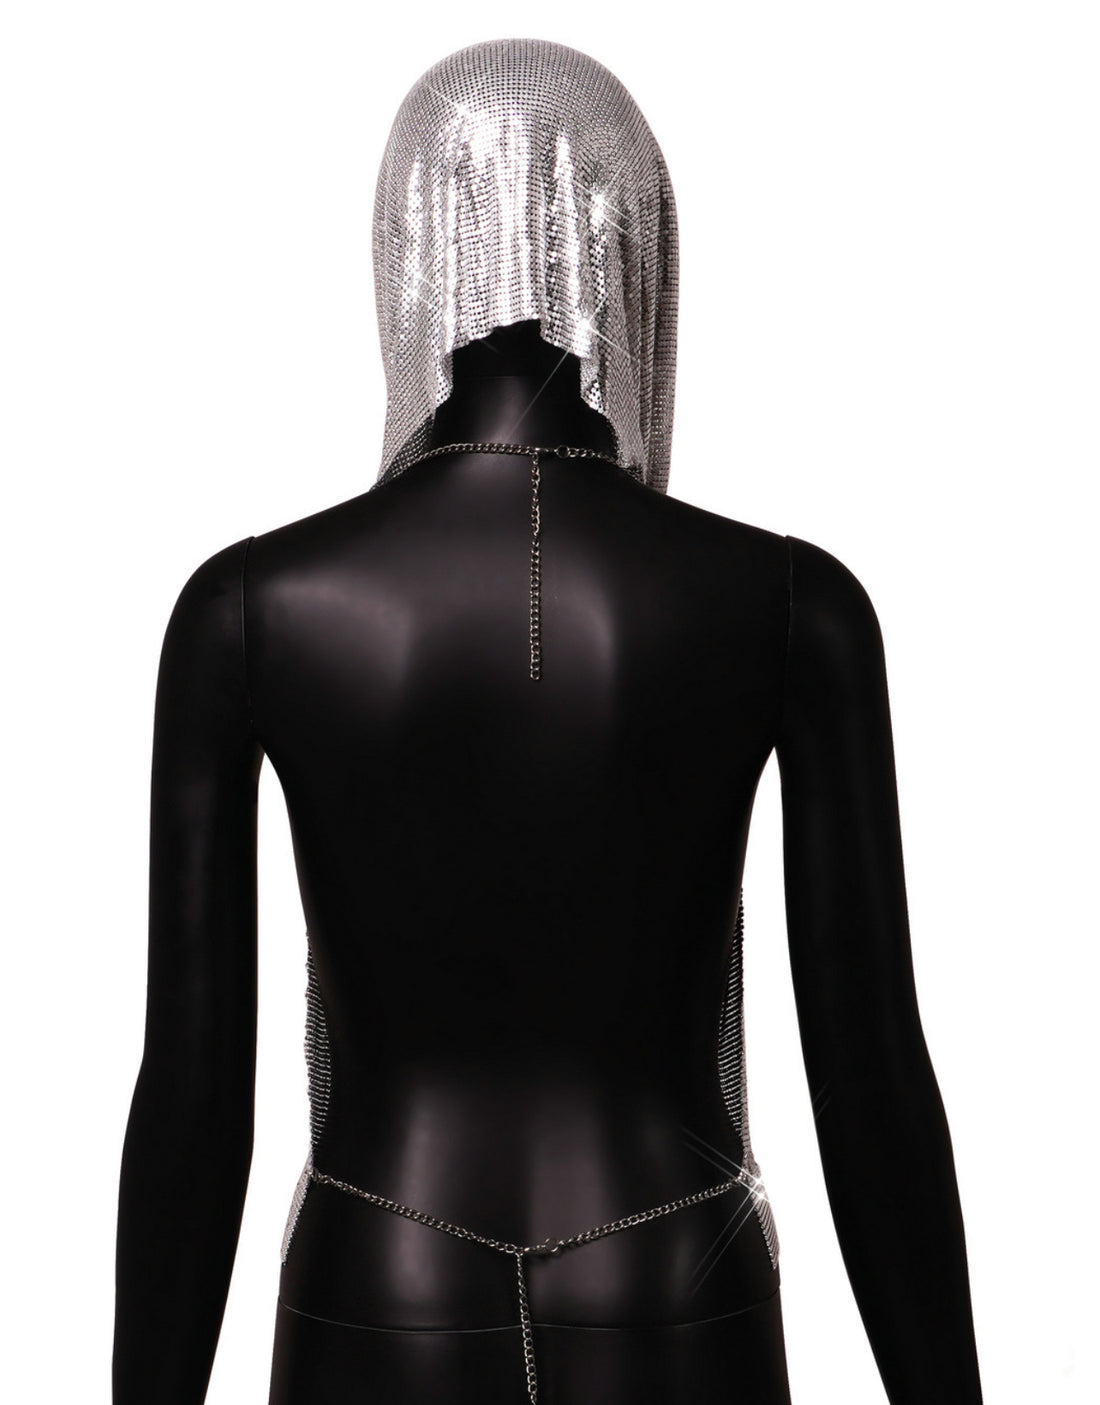 Shimmer Nights Hooded Top ONLINE ONLY - Beauty Junkee Collection